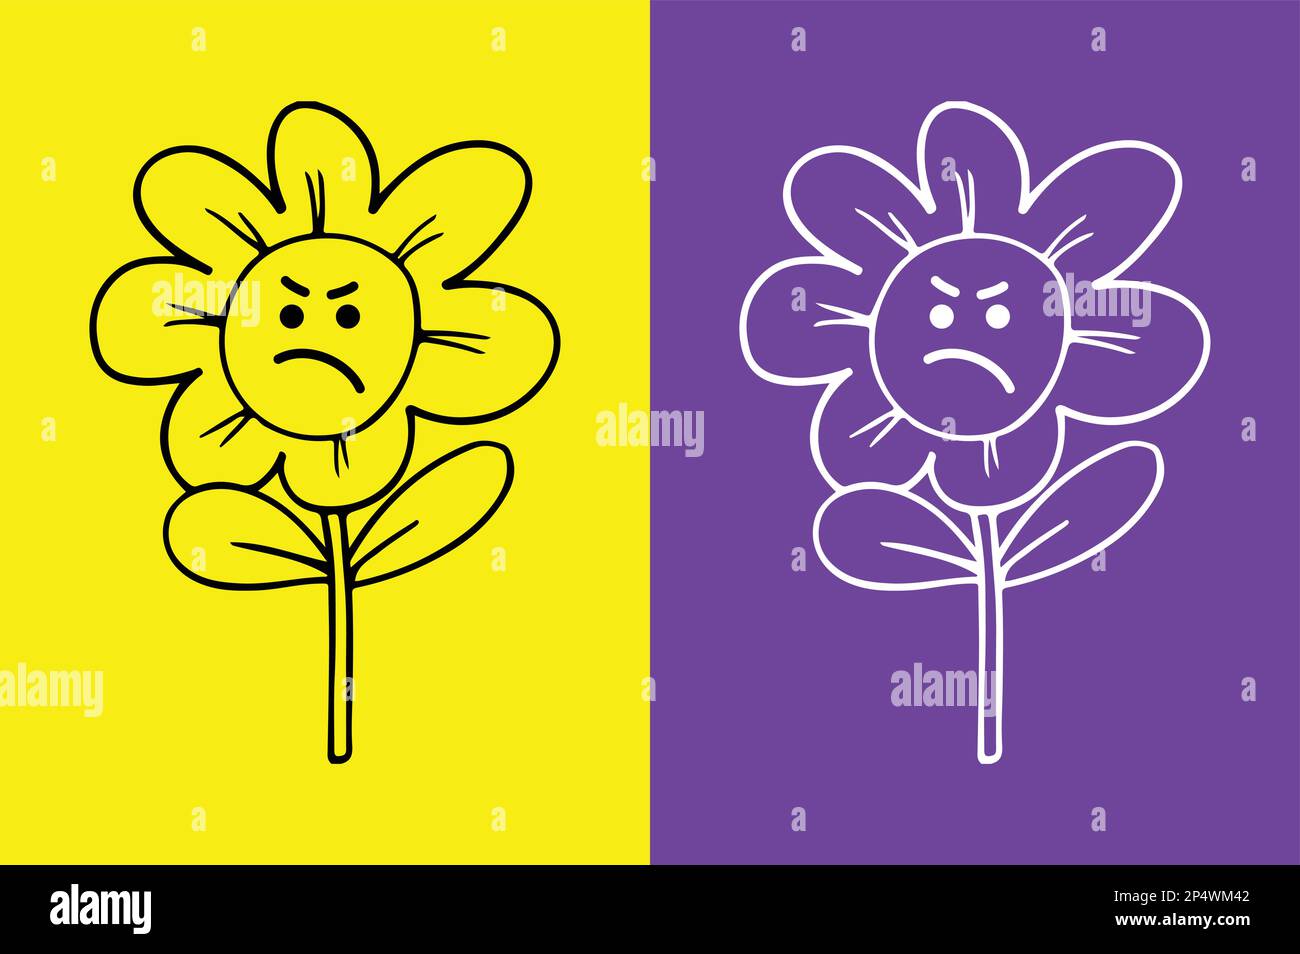 Flower angry face emoji Stock Vector